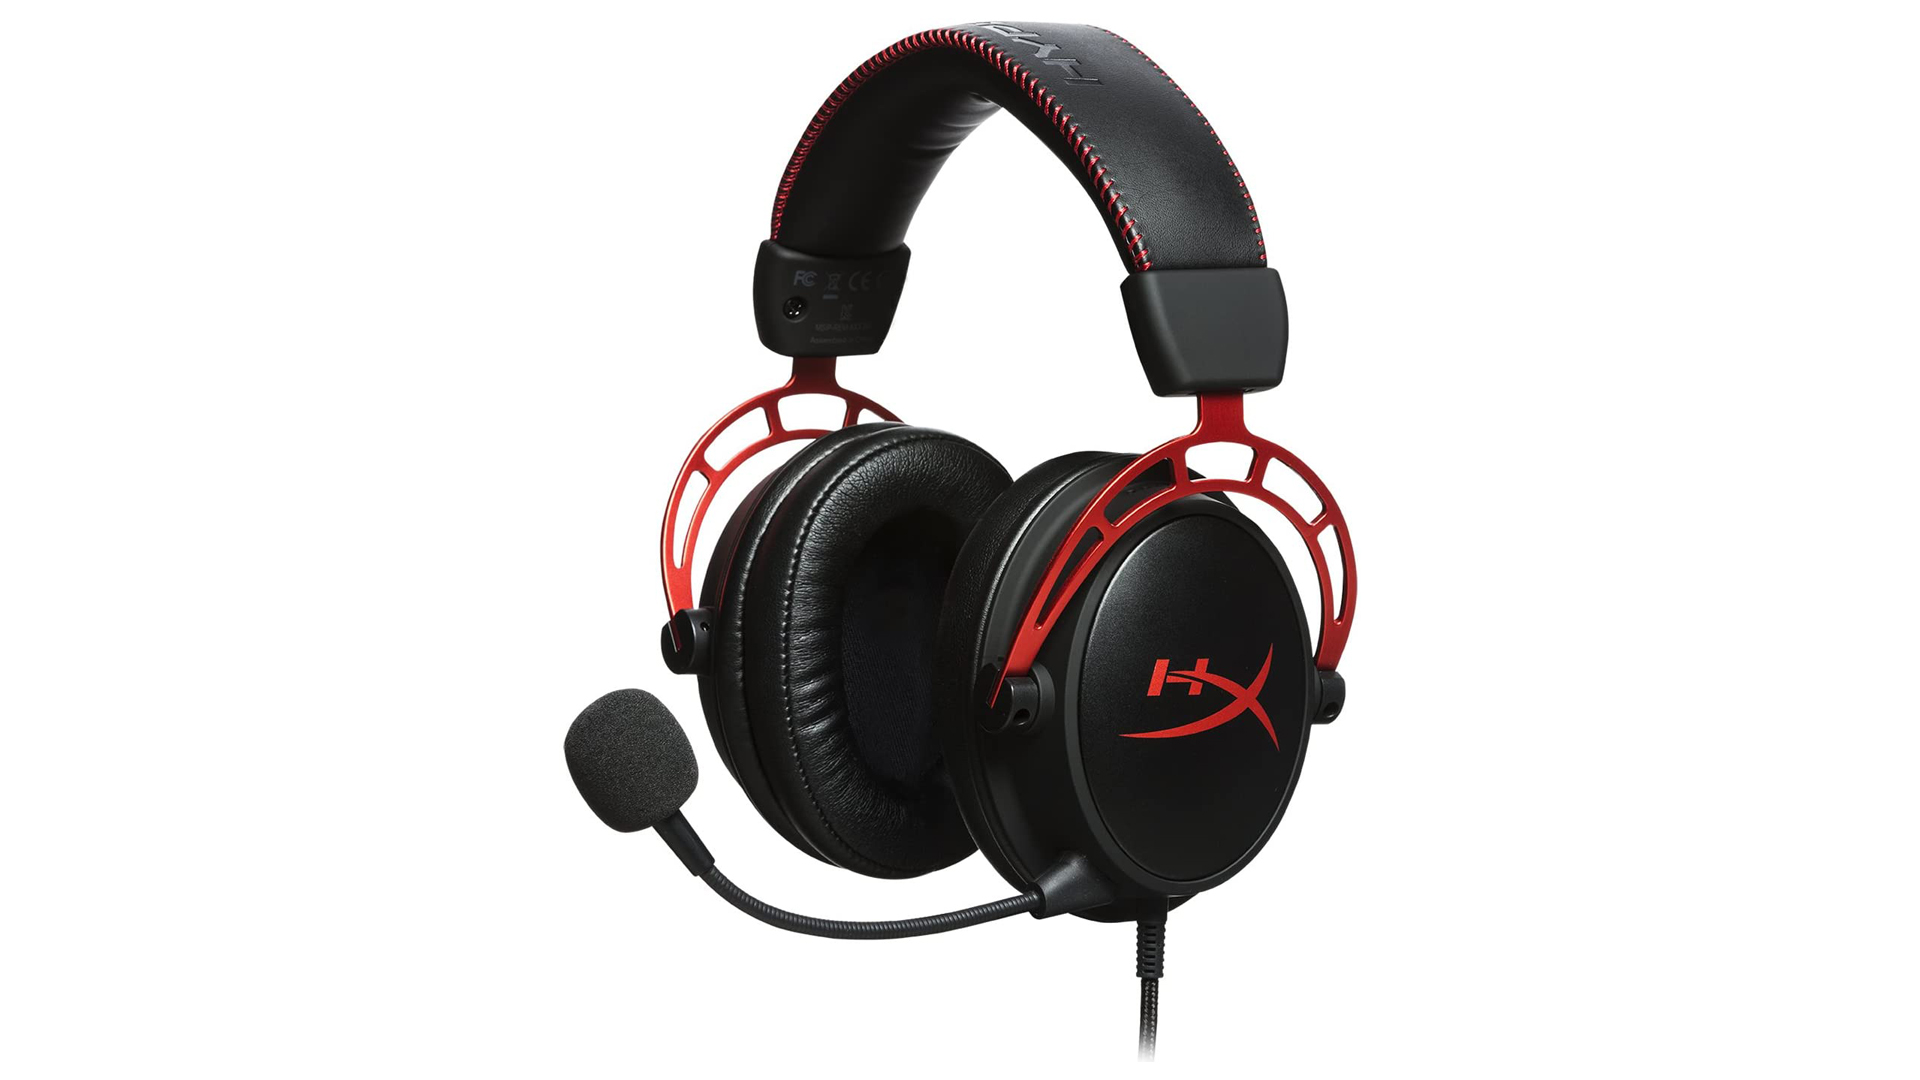 Buying a headset for my sons switch. Can someone tell me what